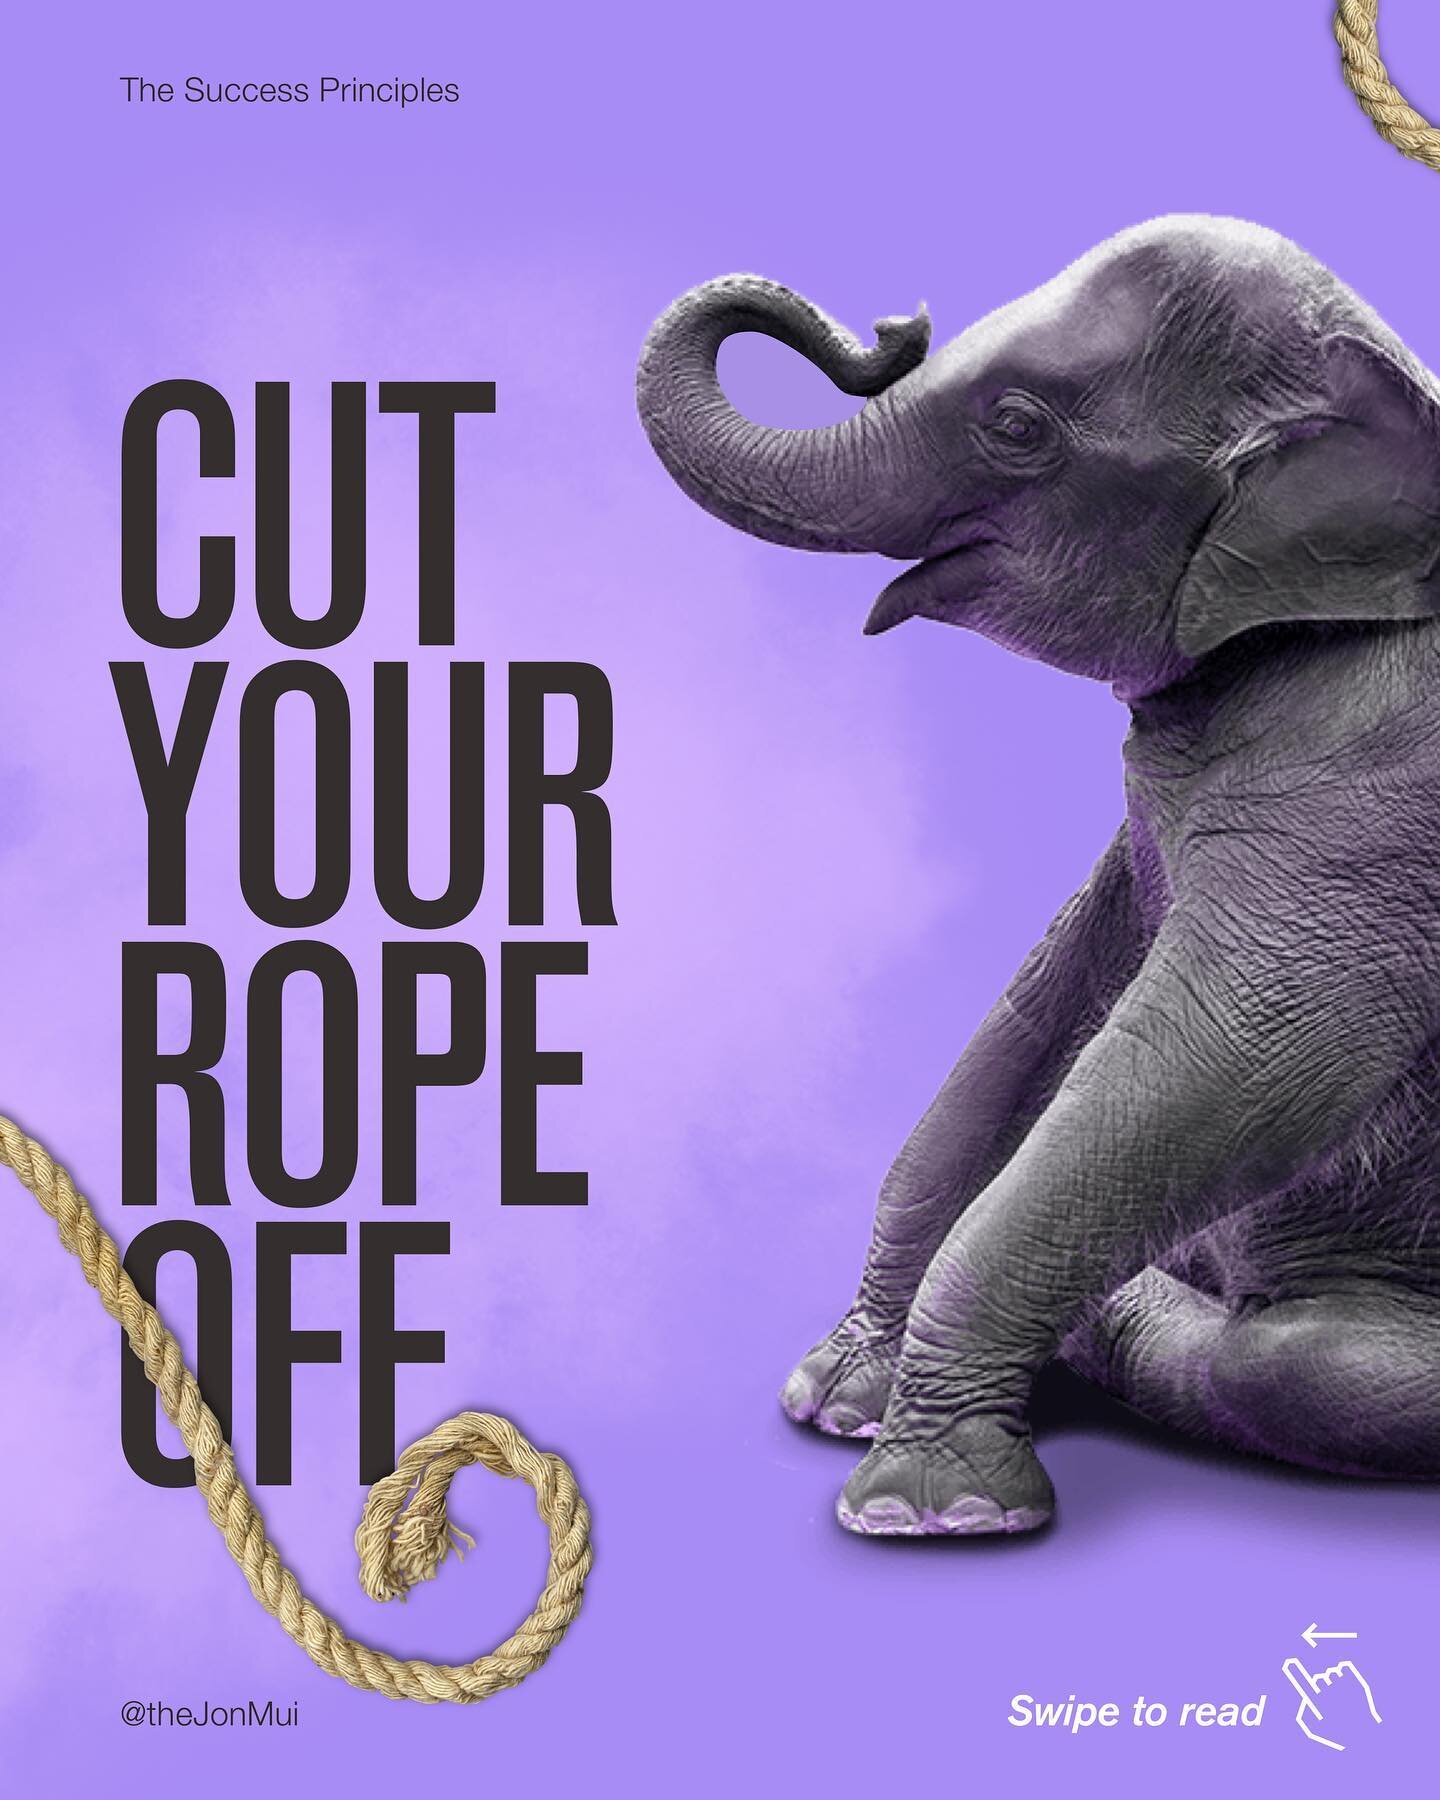 How are we confined by our rope?⁣
⁣
As we tend to stay in a comfort zone ⁣
⁣
entirely of our own making,⁣
⁣
most of us don't realize that ⁣
⁣
we possess the ability to break free.⁣
⁣
Don't be as dumb as an elephant.⁣
⁣
The next time we do something u